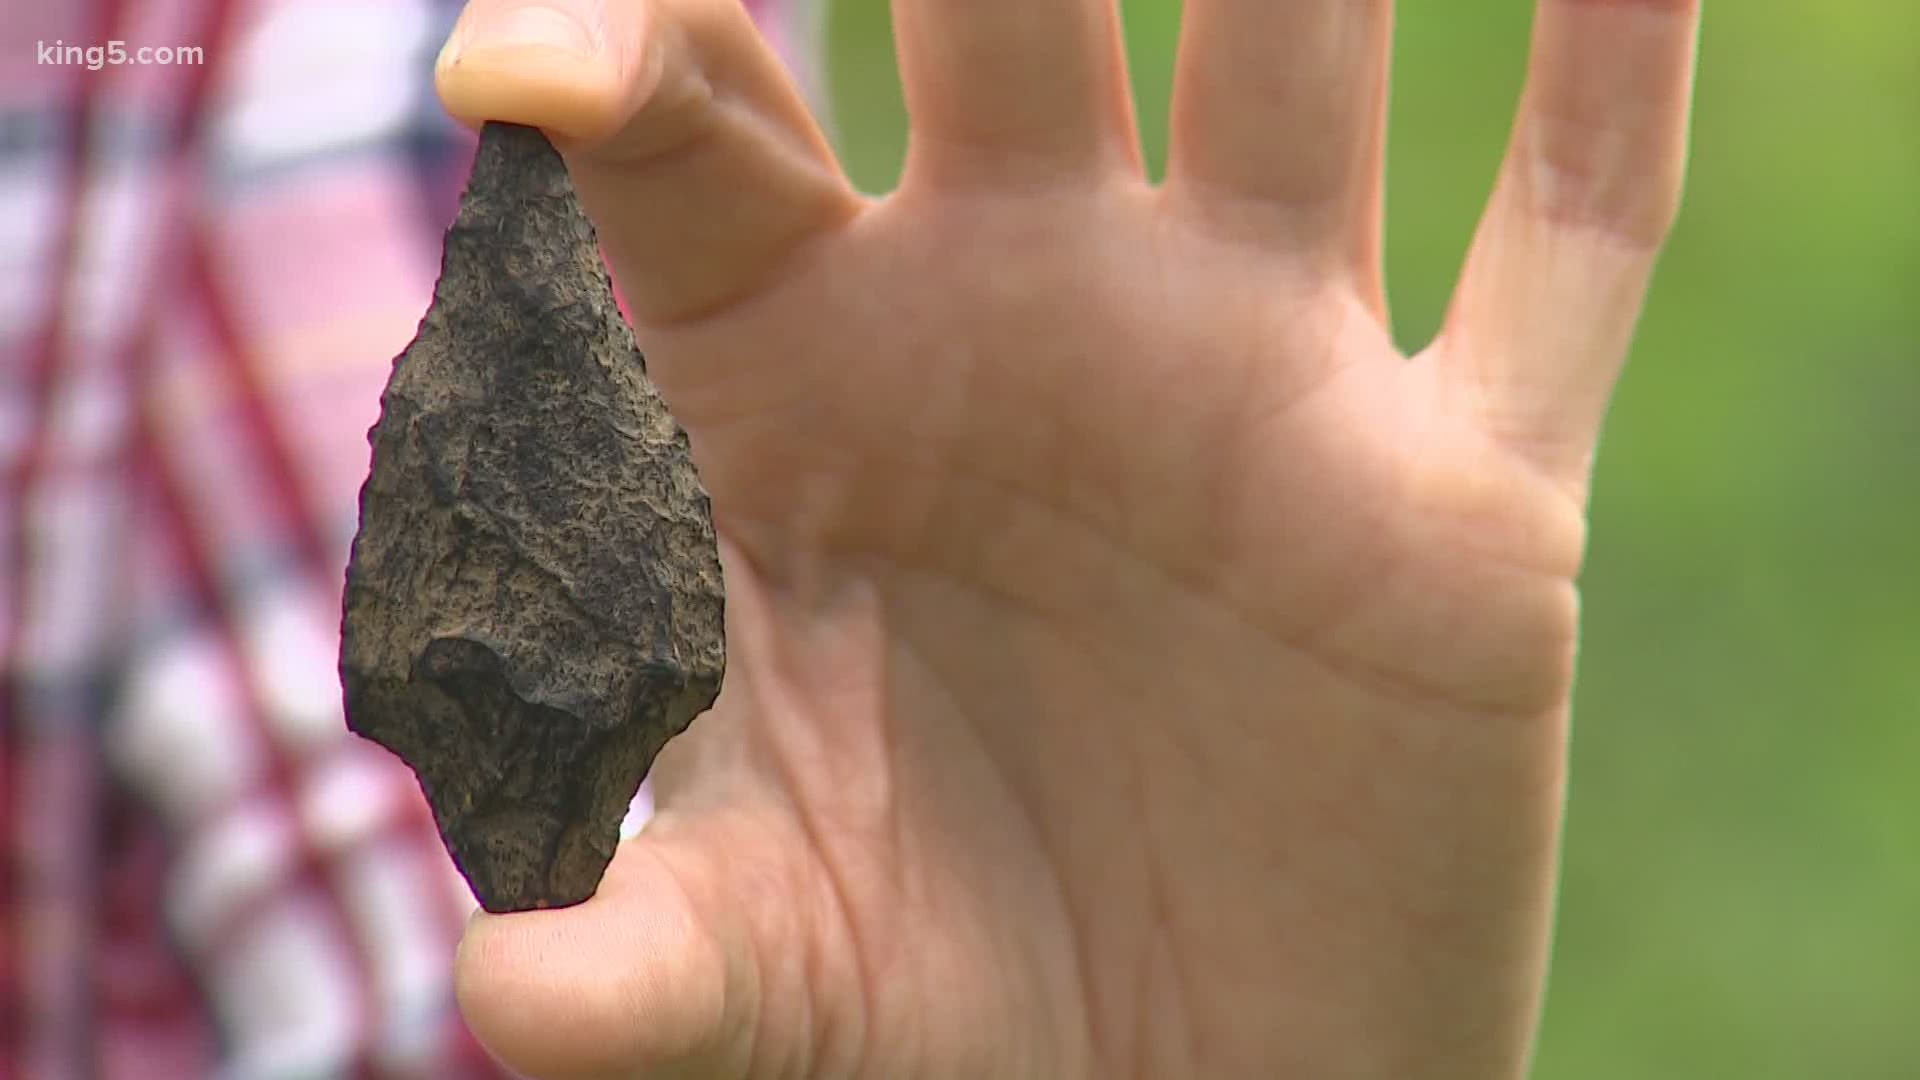 Heather uncovered it while digging a new garden with her teenage son – what she described as an arrowhead, buried just 6-8 inches deep in the soil.